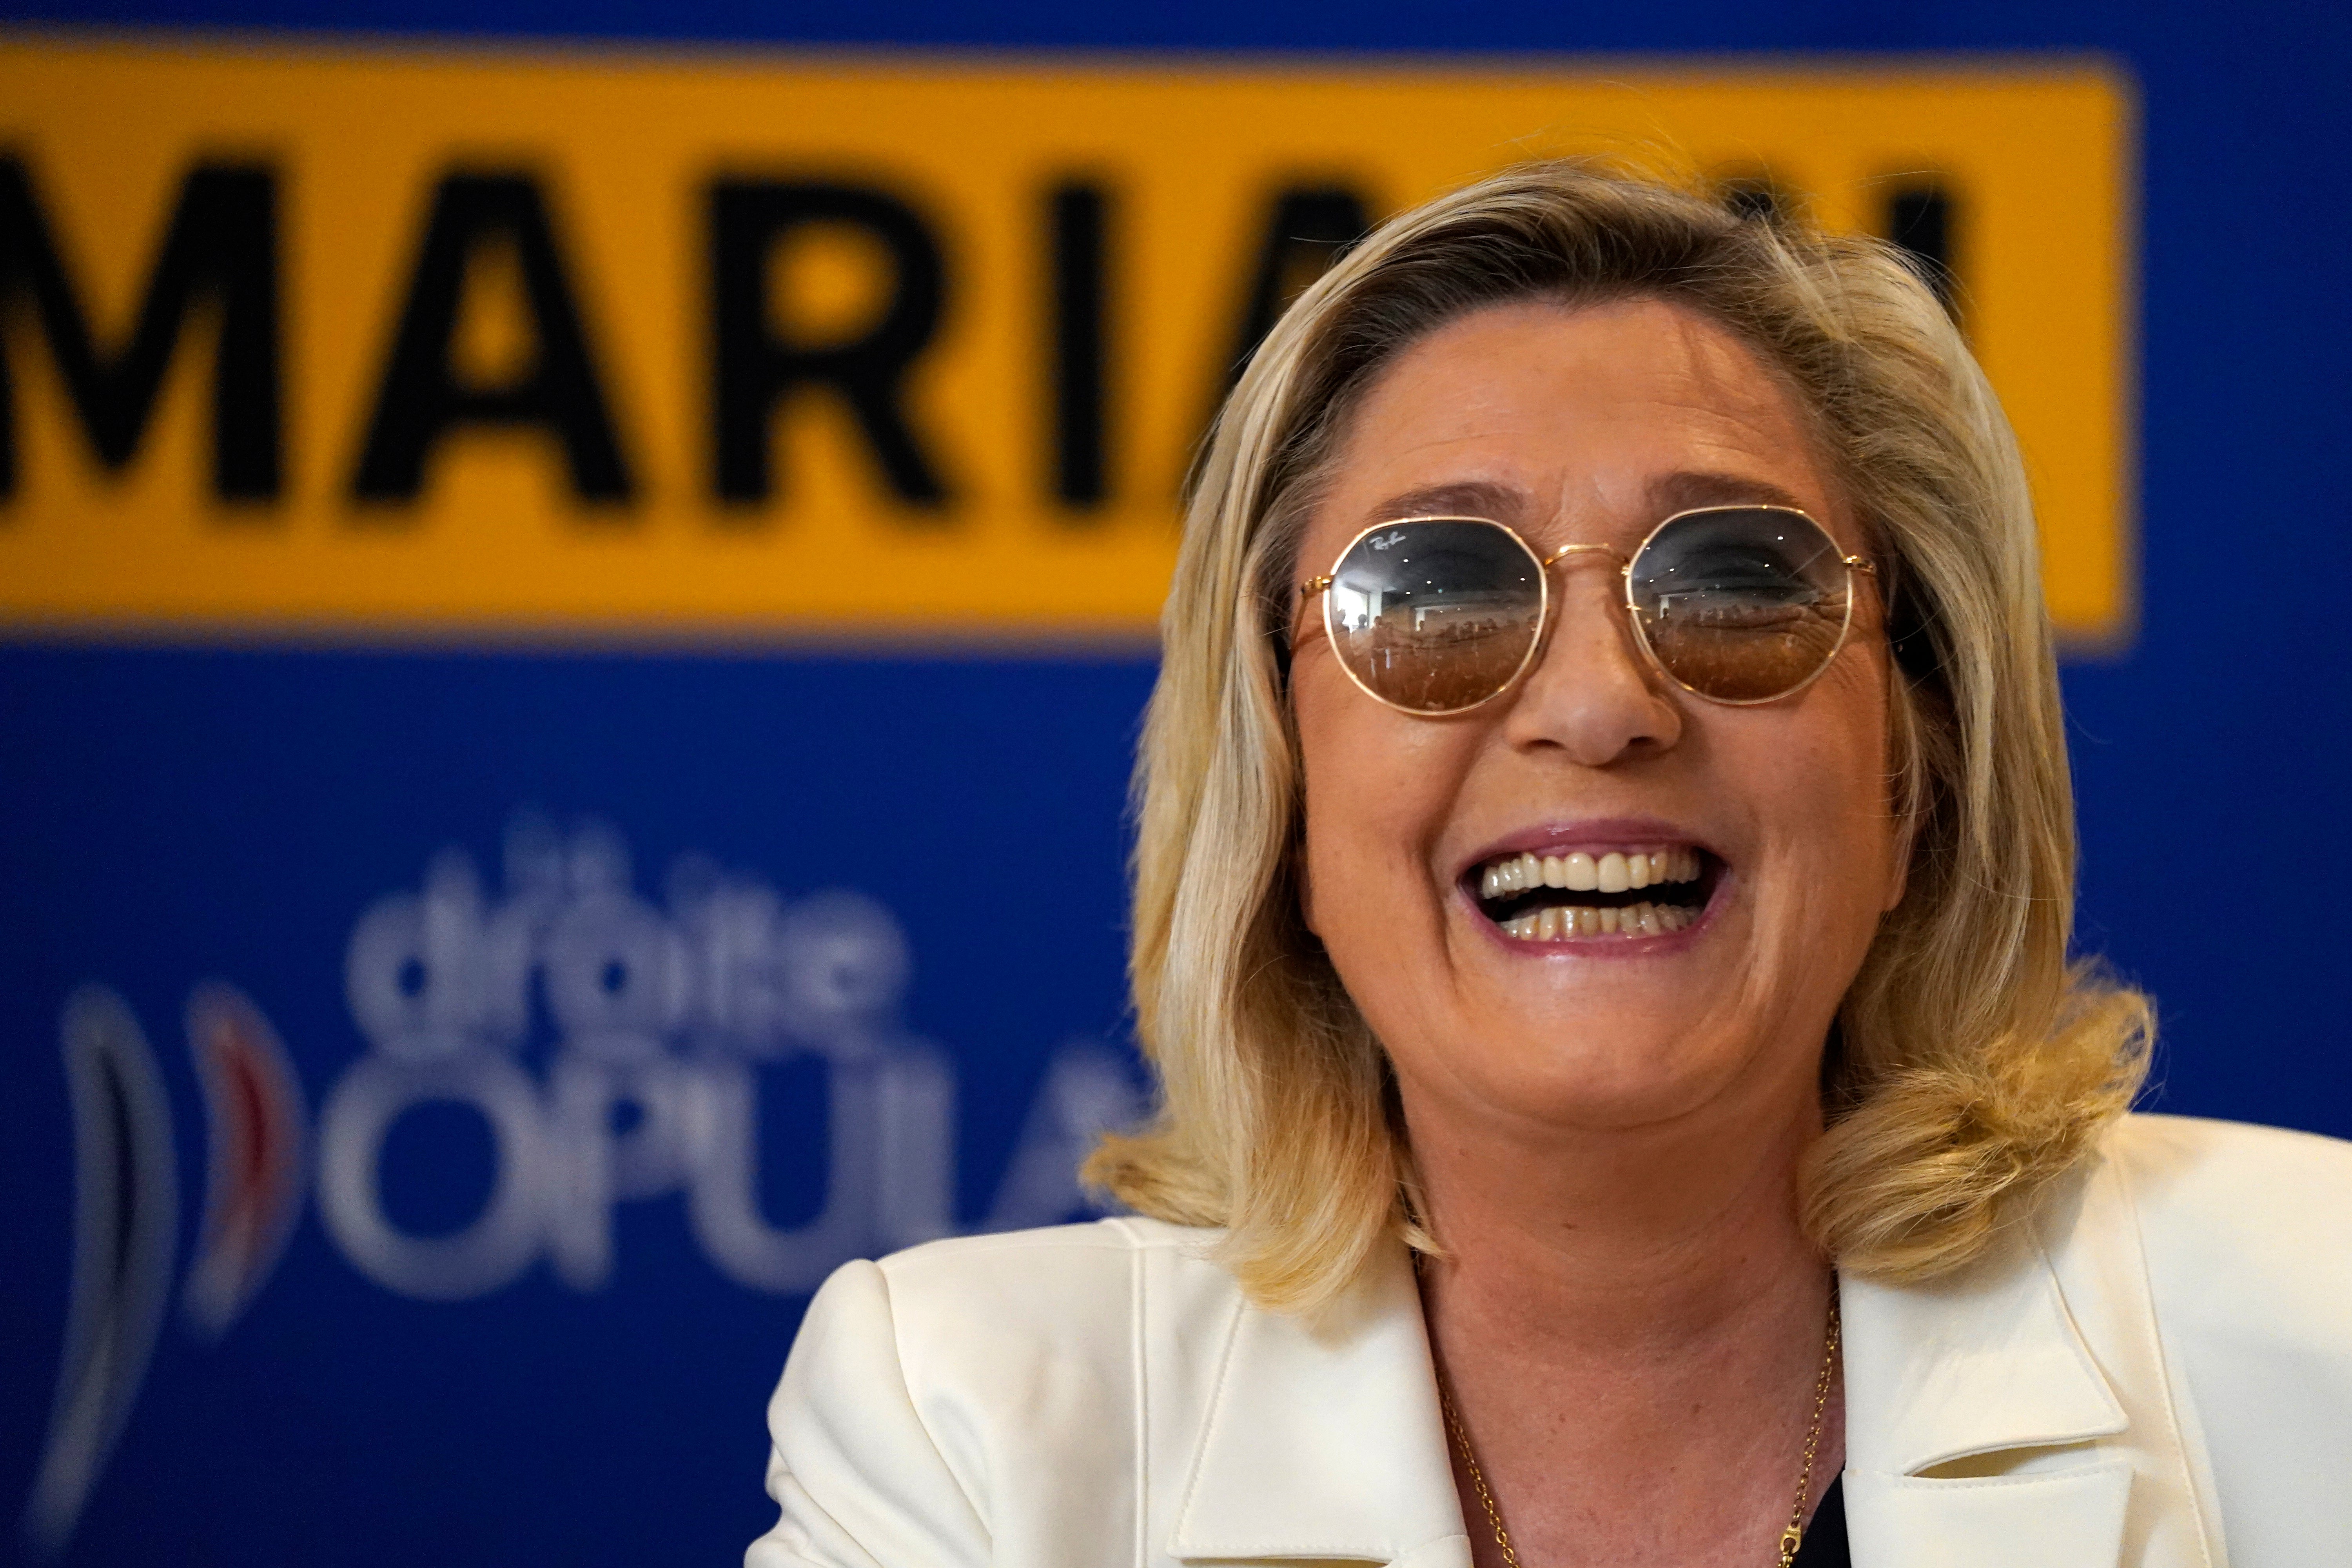 Far-right leader Marine le Pen smiles during a press conference in Toulon, southern France